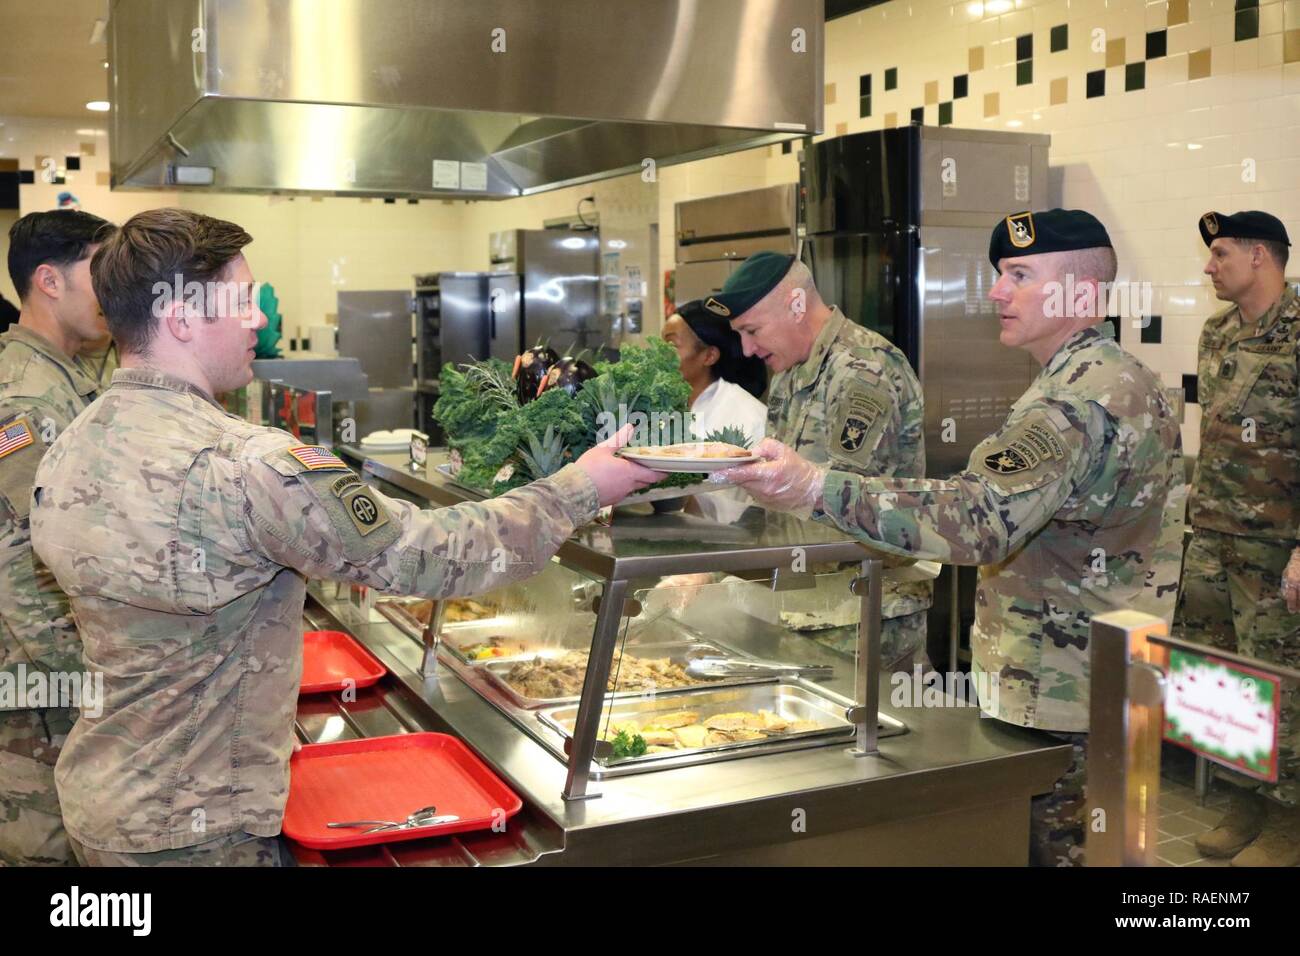 Sergeant Maj. Dale Kozelka, operations sergeant major, 4th Battalion, 1st Special Warfare Training Group (Airborne), hands a plate to a Soldier during a holiday lunch at the U.S. Army Special Warfare Center and School Dining Facility, Fort Bragg, North Carolina, on Dec. 13, 2018. The DFAC personnel prepared a special lunch served by leadership prior to holiday leave. Stock Photo